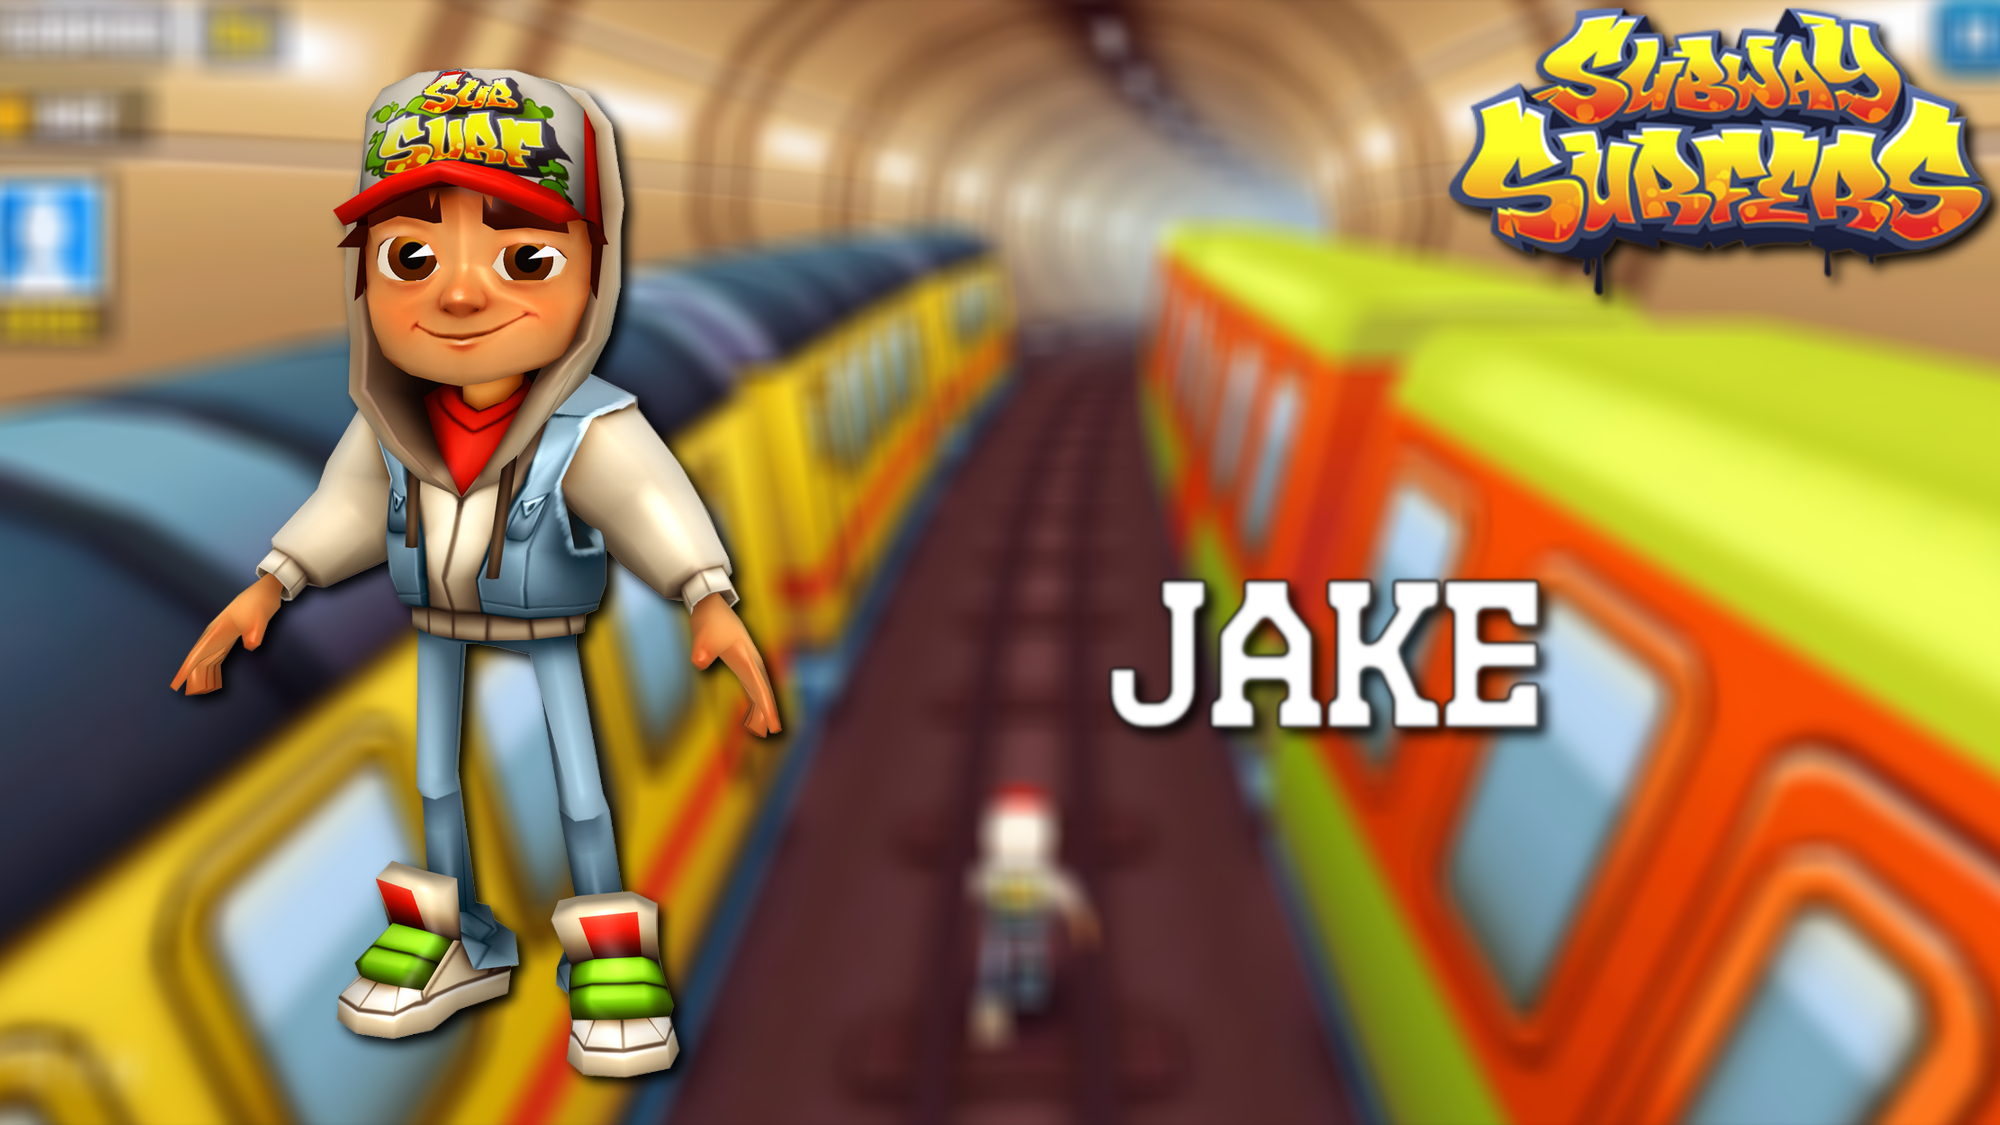 The Gaming Universe: Subway Surfers by warewolff on DeviantArt